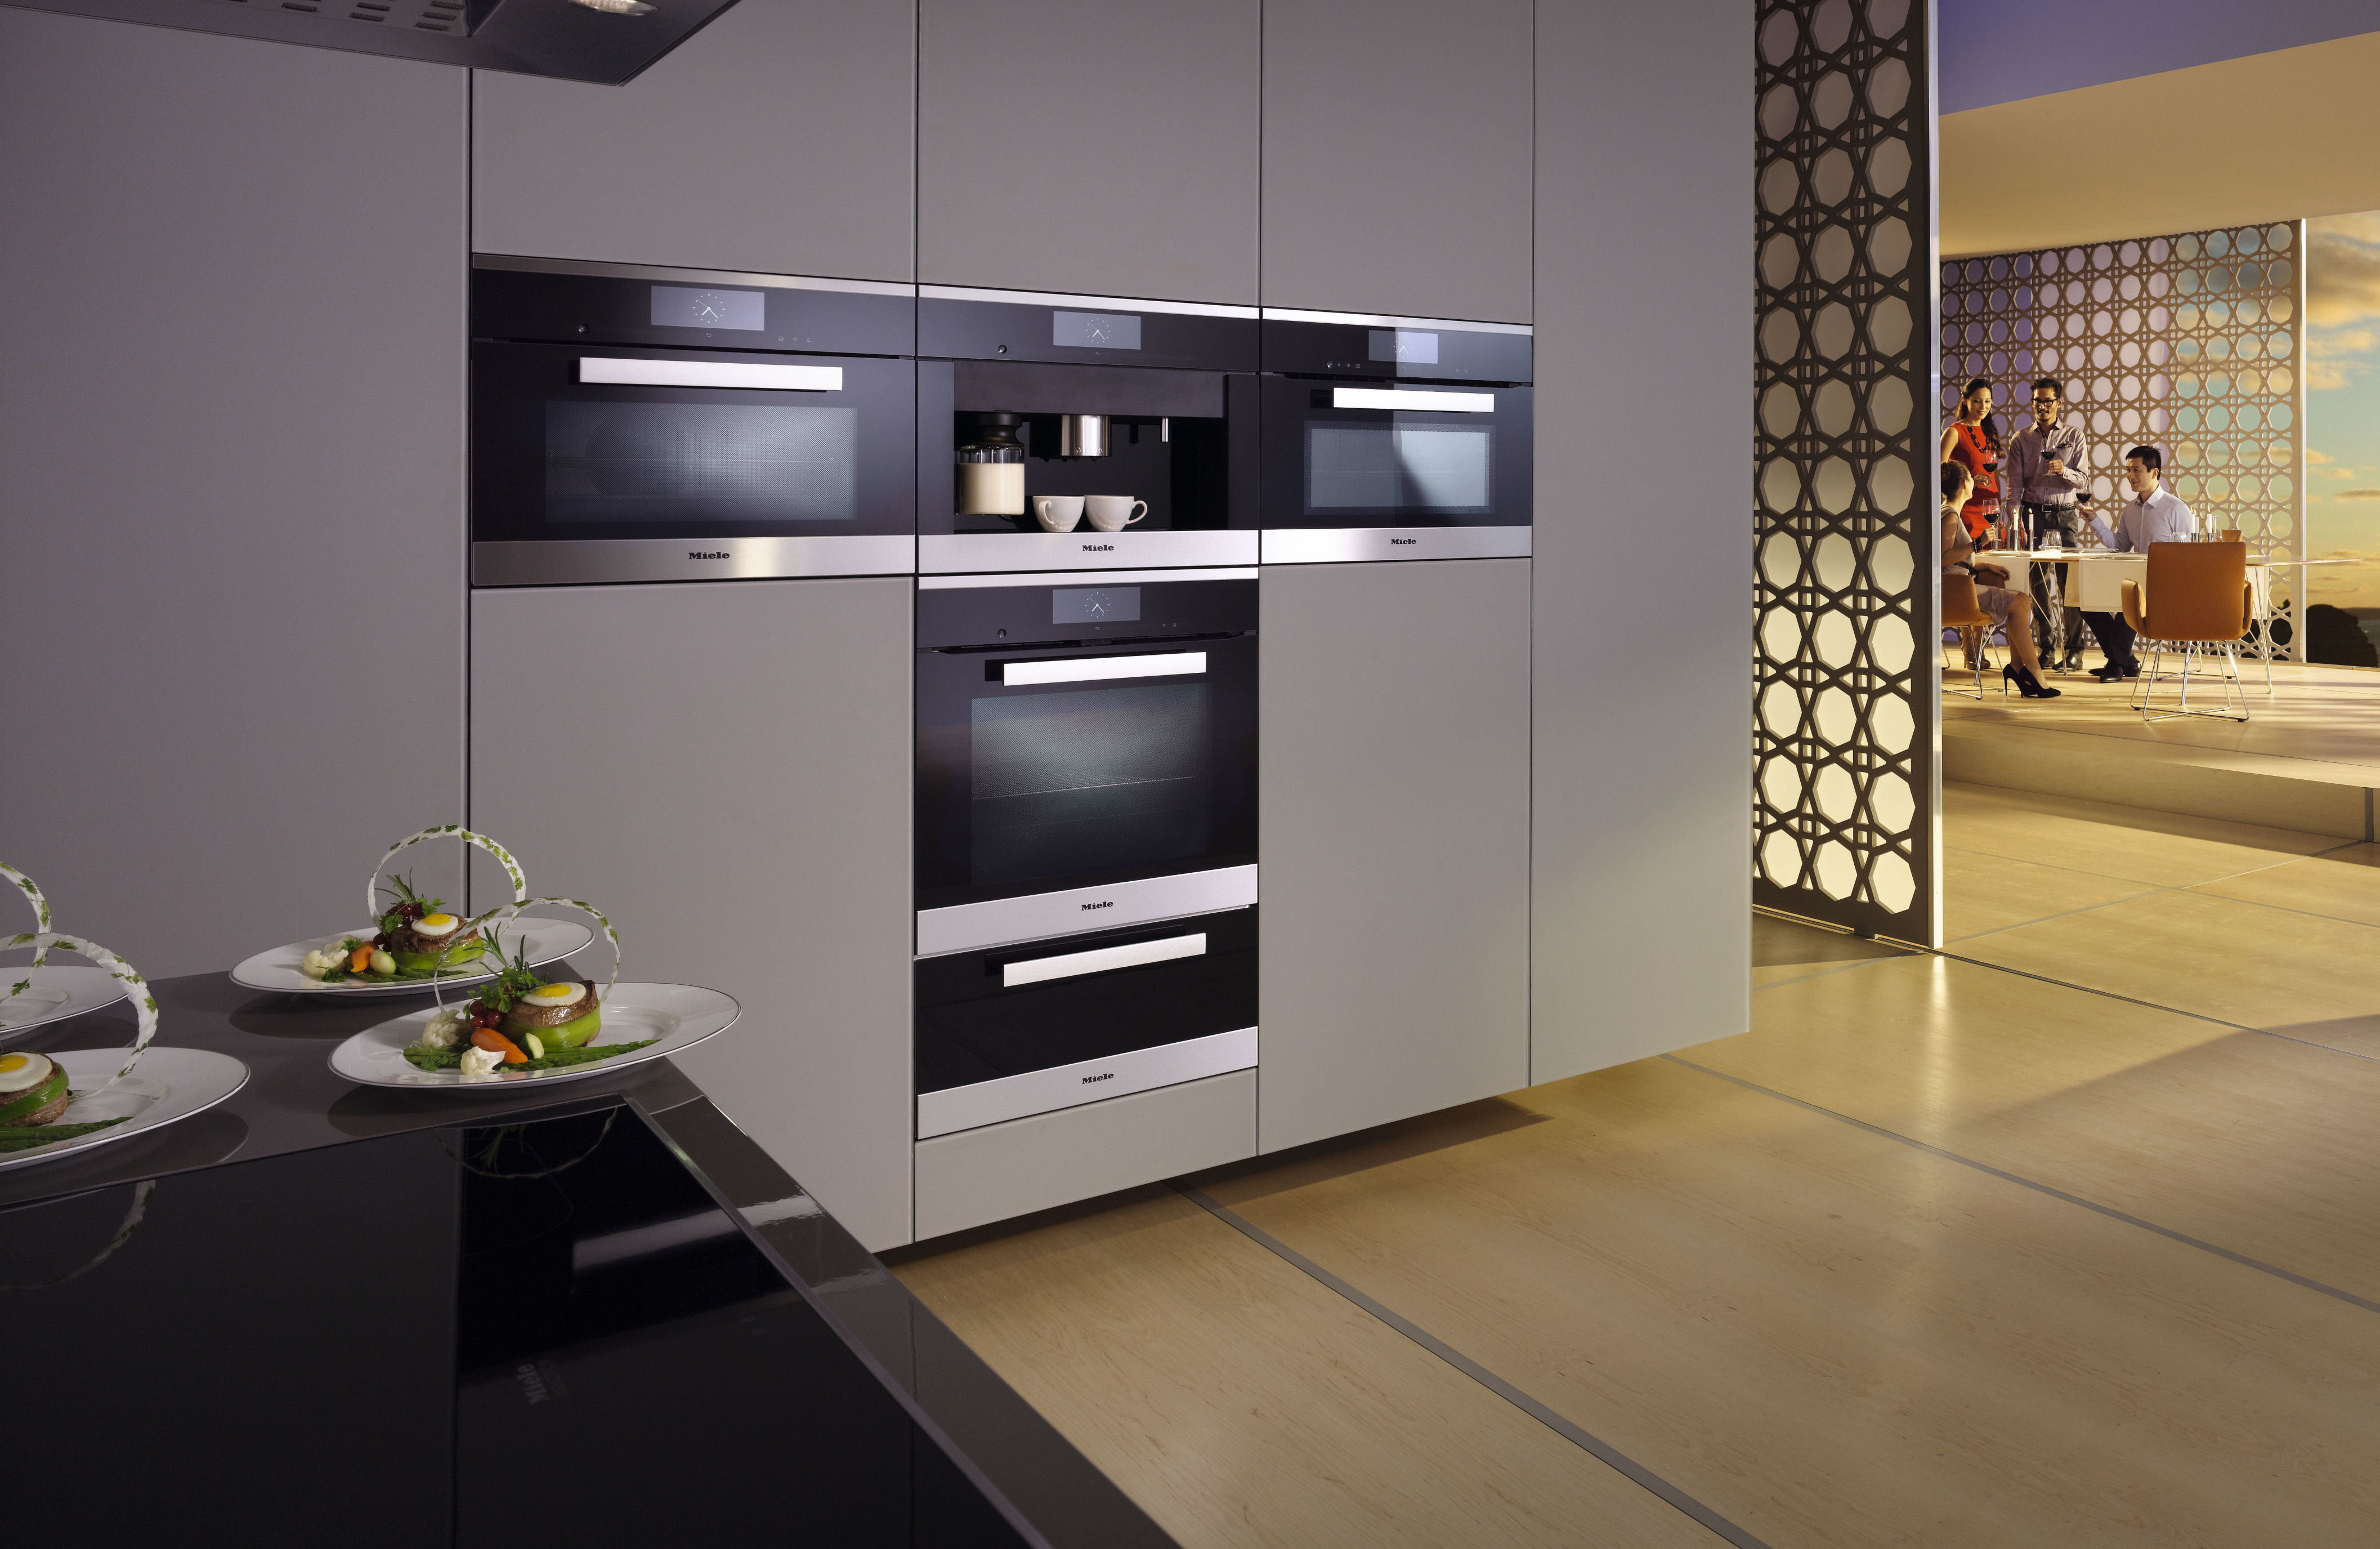 Miele Appliance Stack including Coffee Machine and souz vide oven 